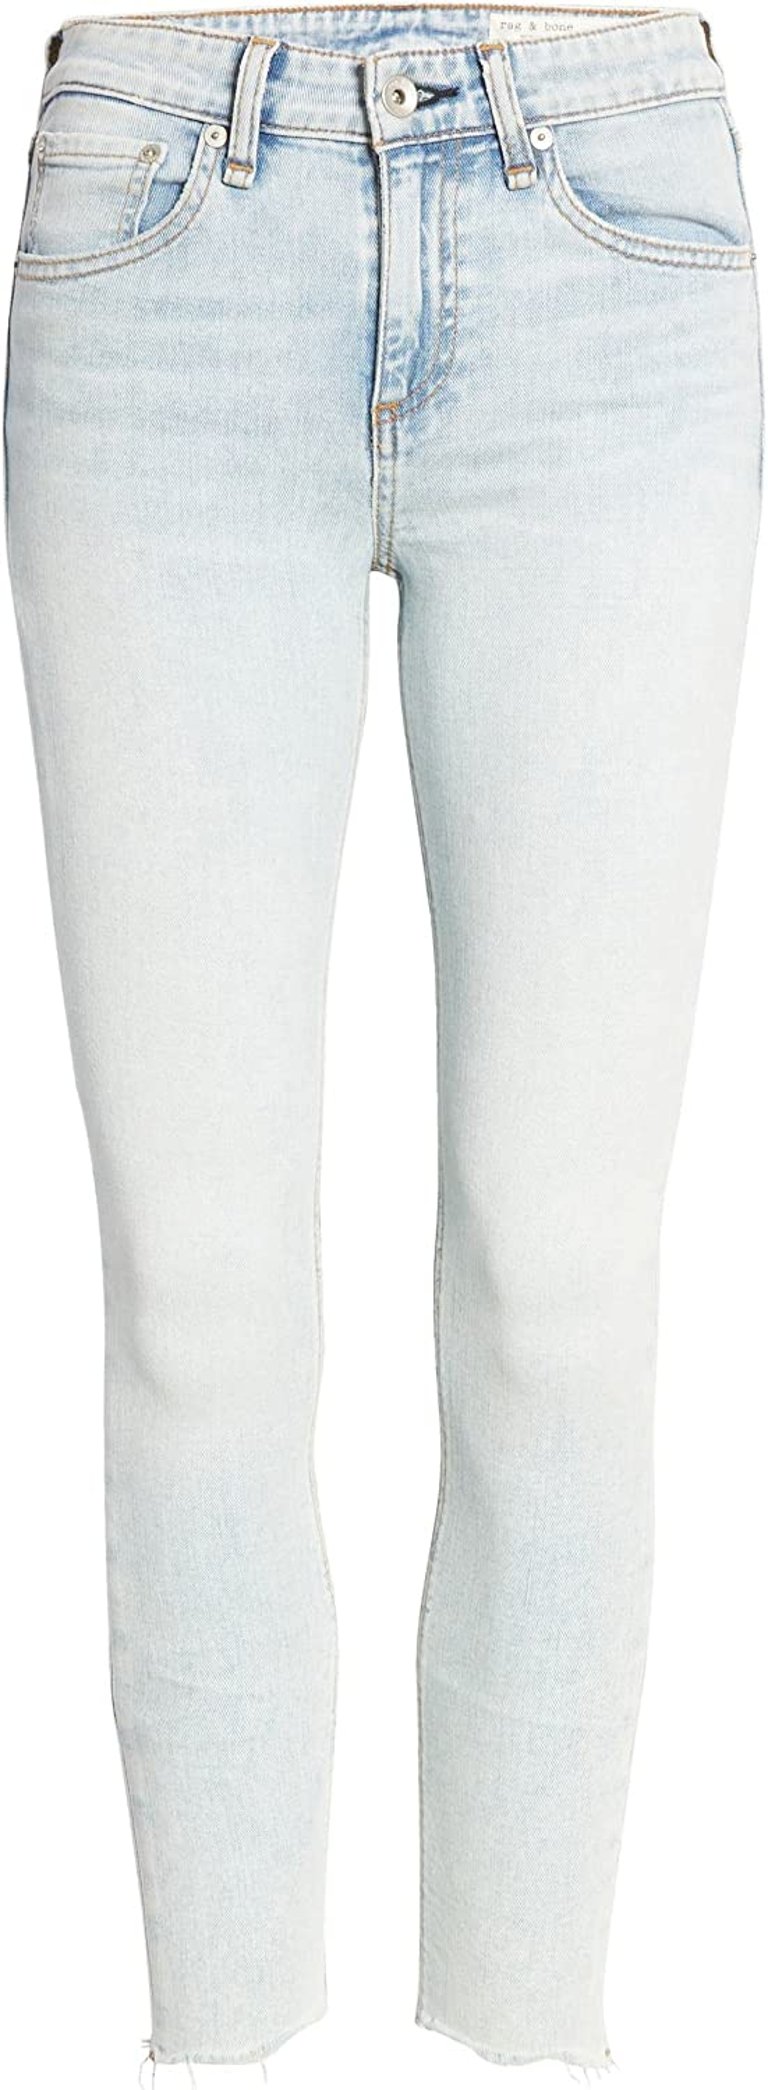 Cate Mid Rise Ankle Jeans Skinny Jade - Blue